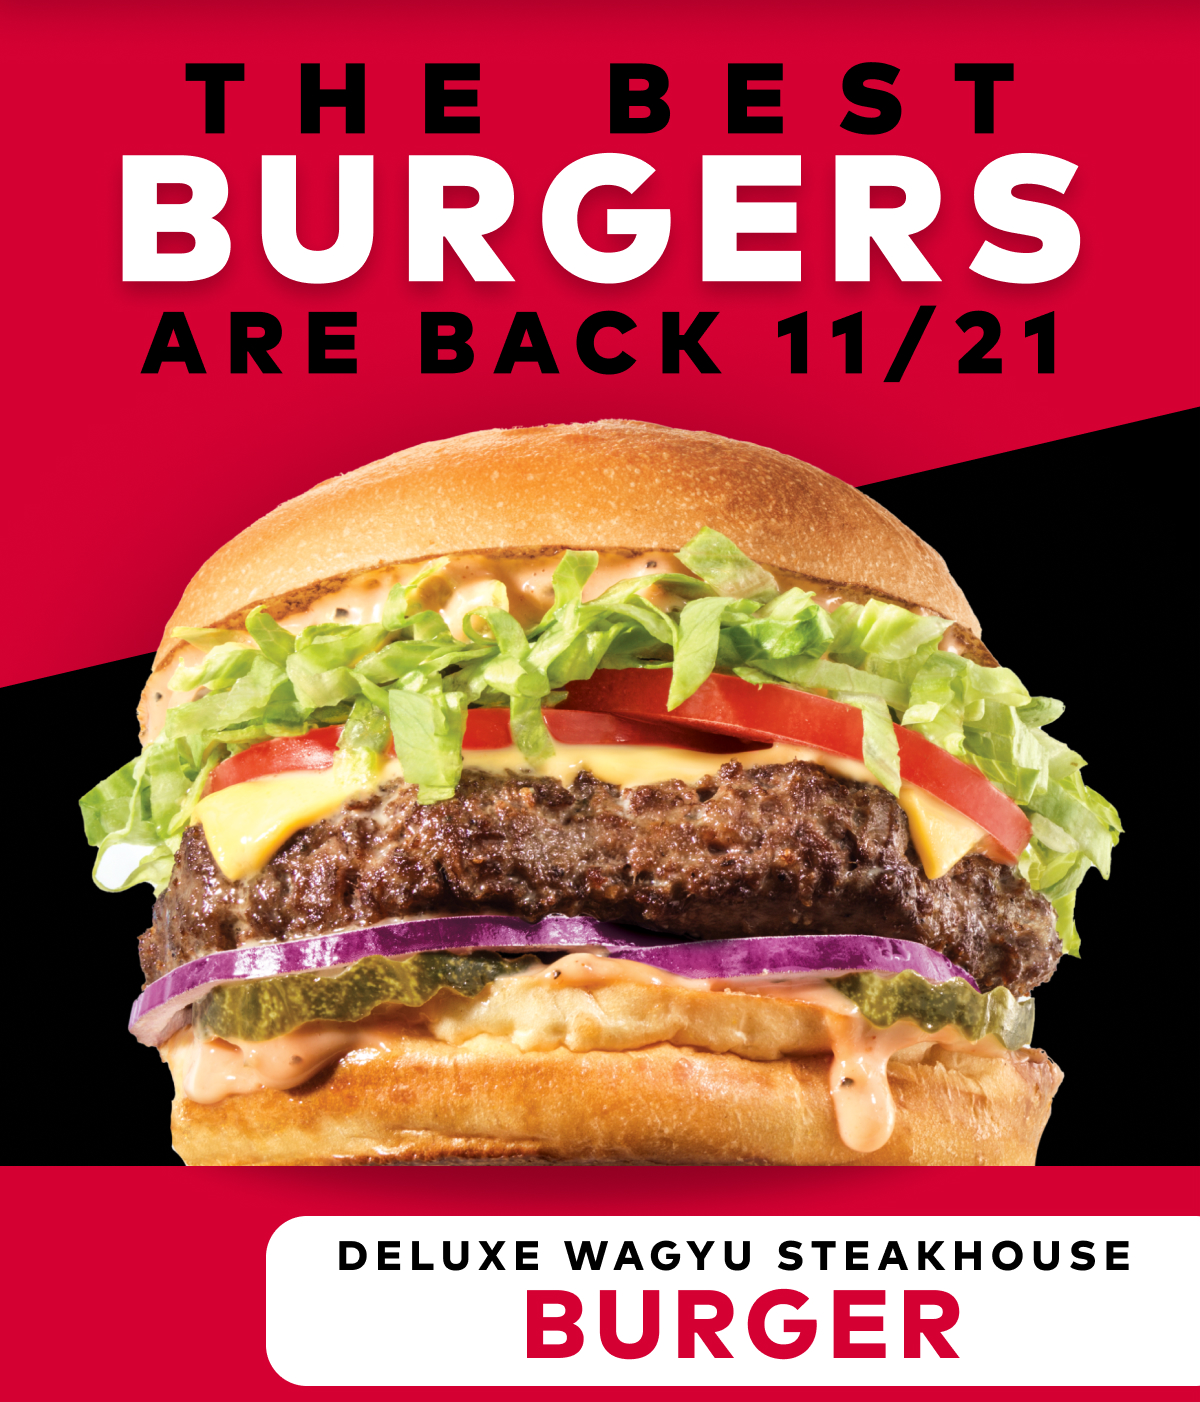 The Best Burgers Are Back 11/21